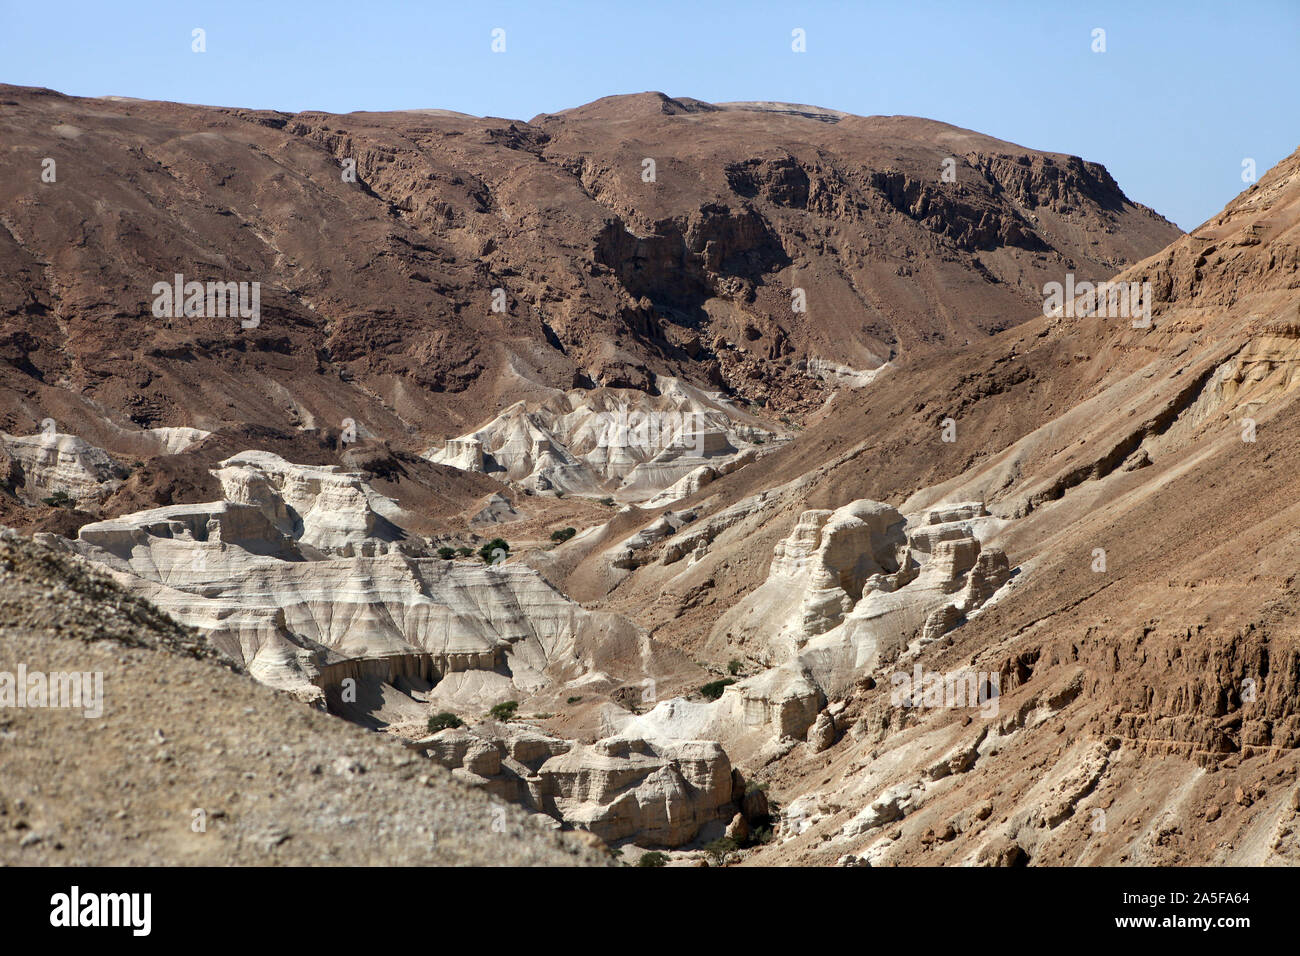 Structure of sandy mountains near the Dead sea, Where the Dead Sea rolls have been found, Israel Stock Photo